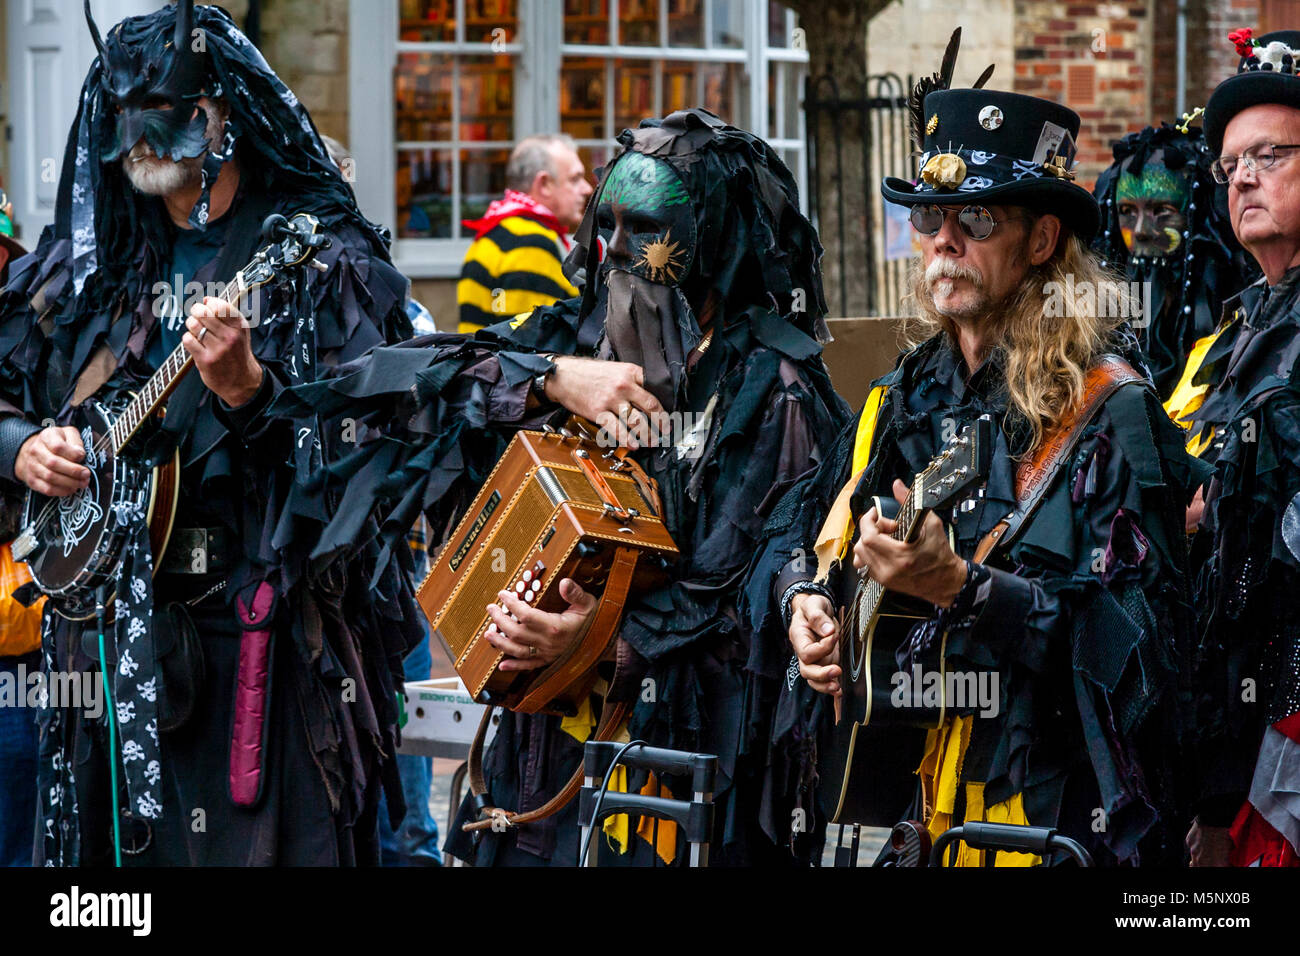 Musicians From Mythago Morris Side Perform At The Lewes Folk